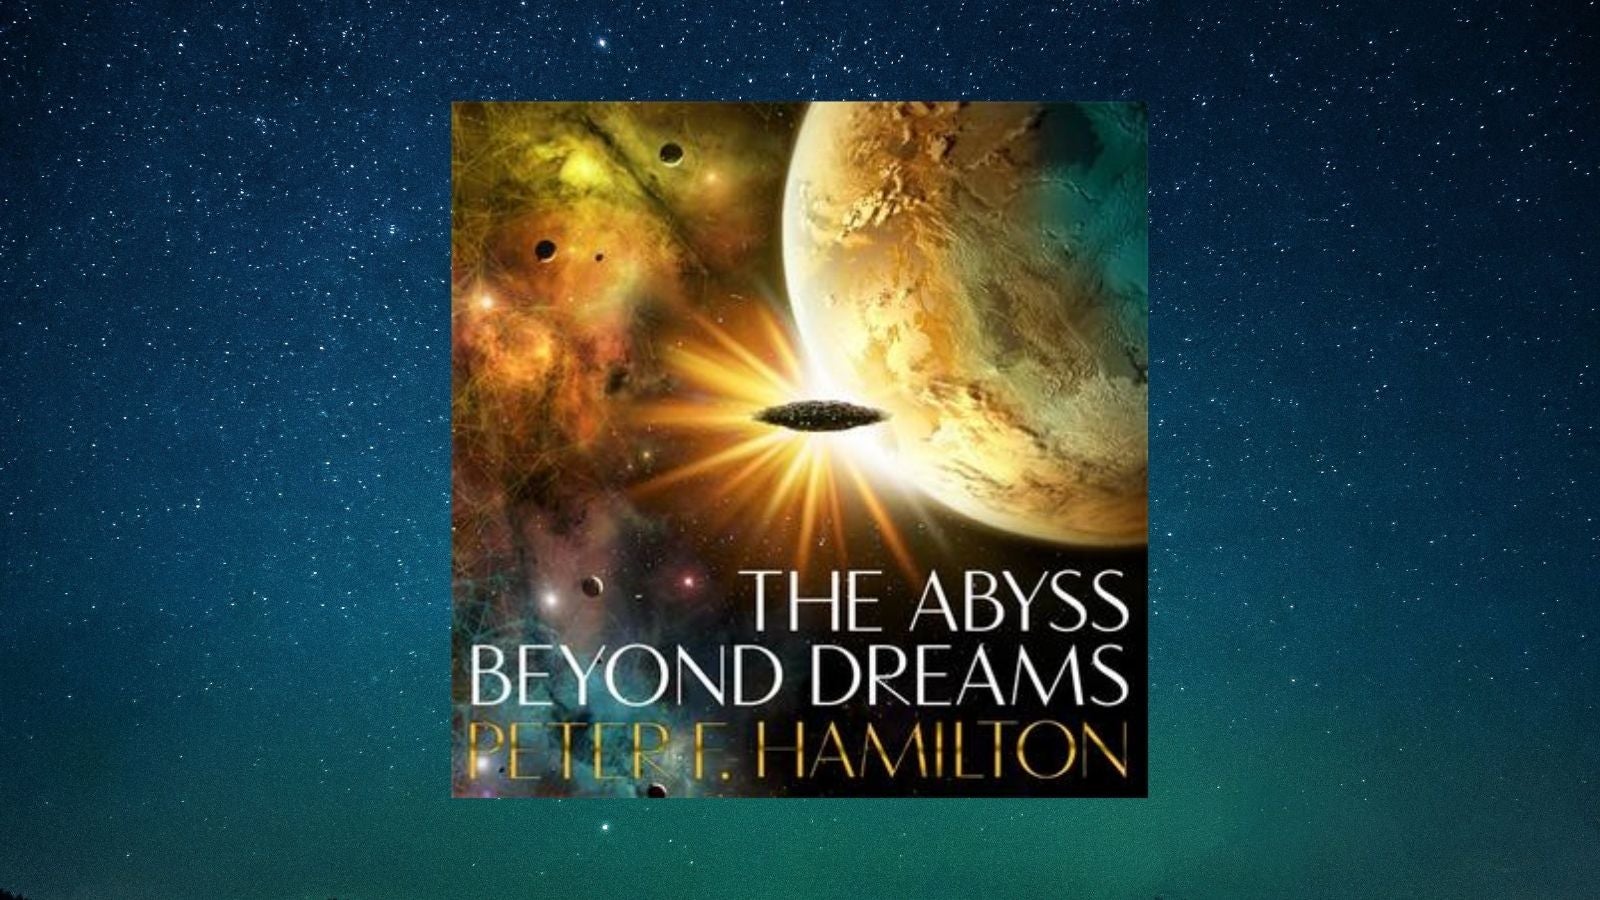 The Abyss Beyond Dreams audiobook cover